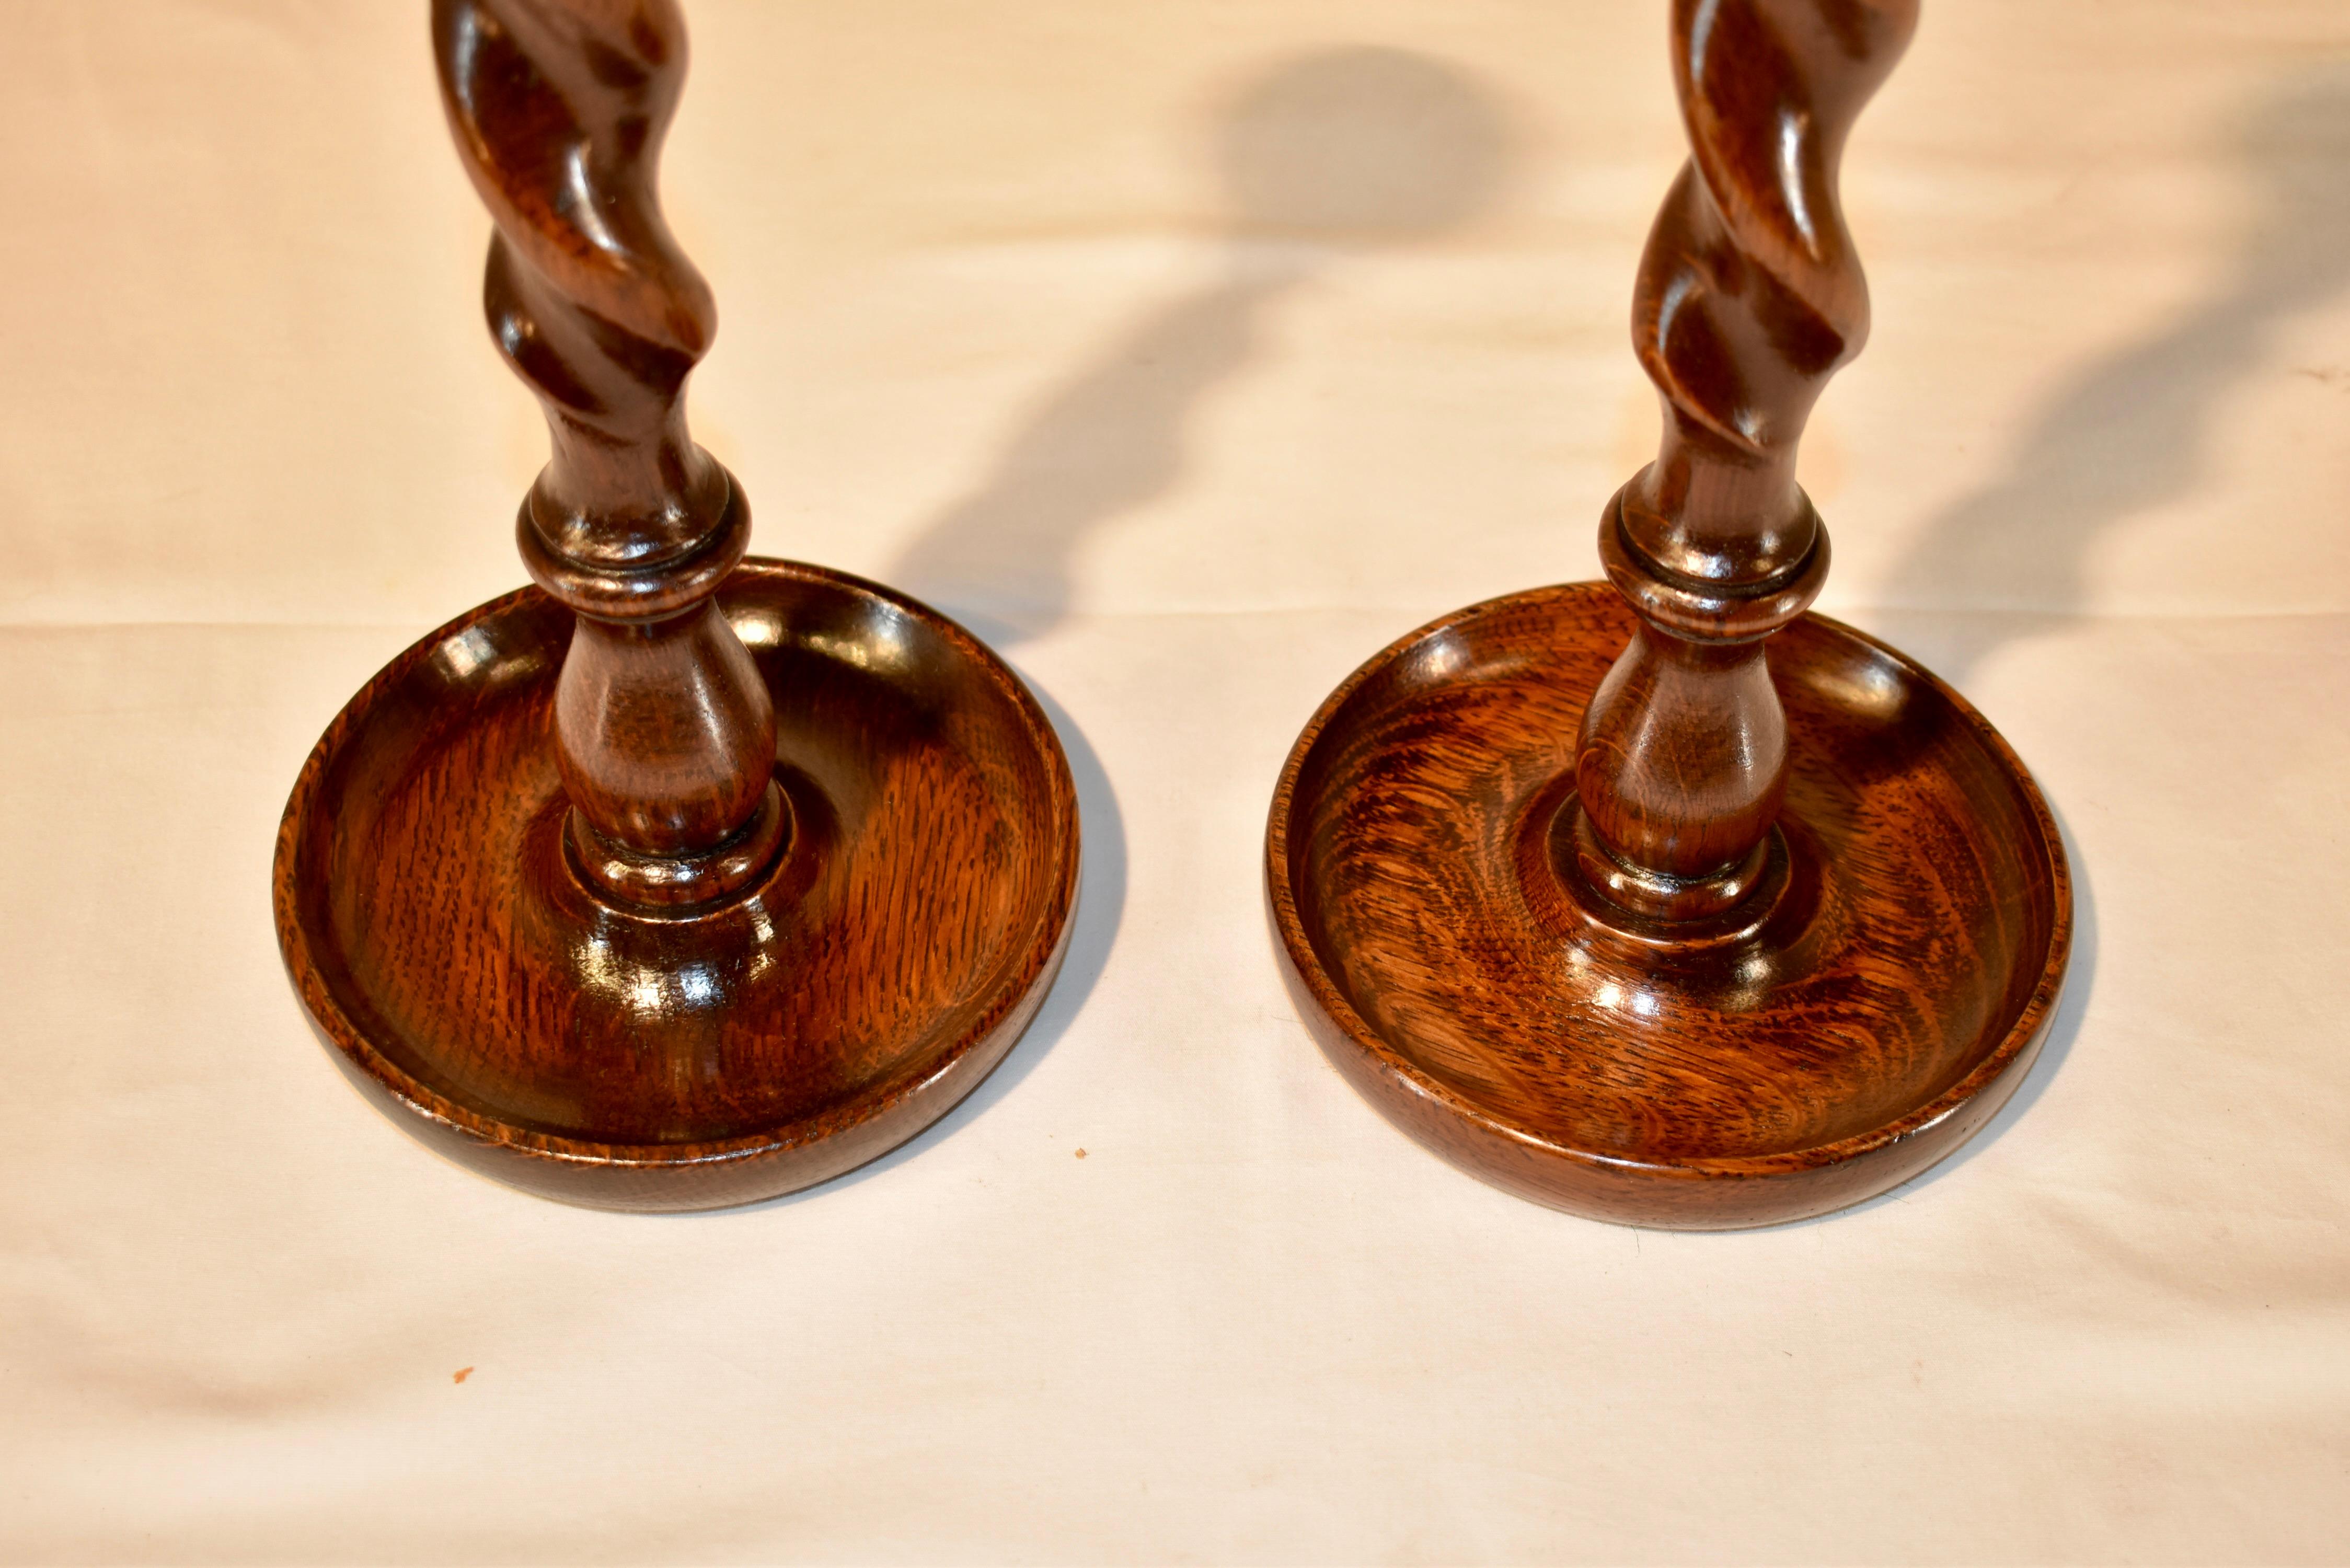 Turned Pair of 19th Century English Candlesticks For Sale